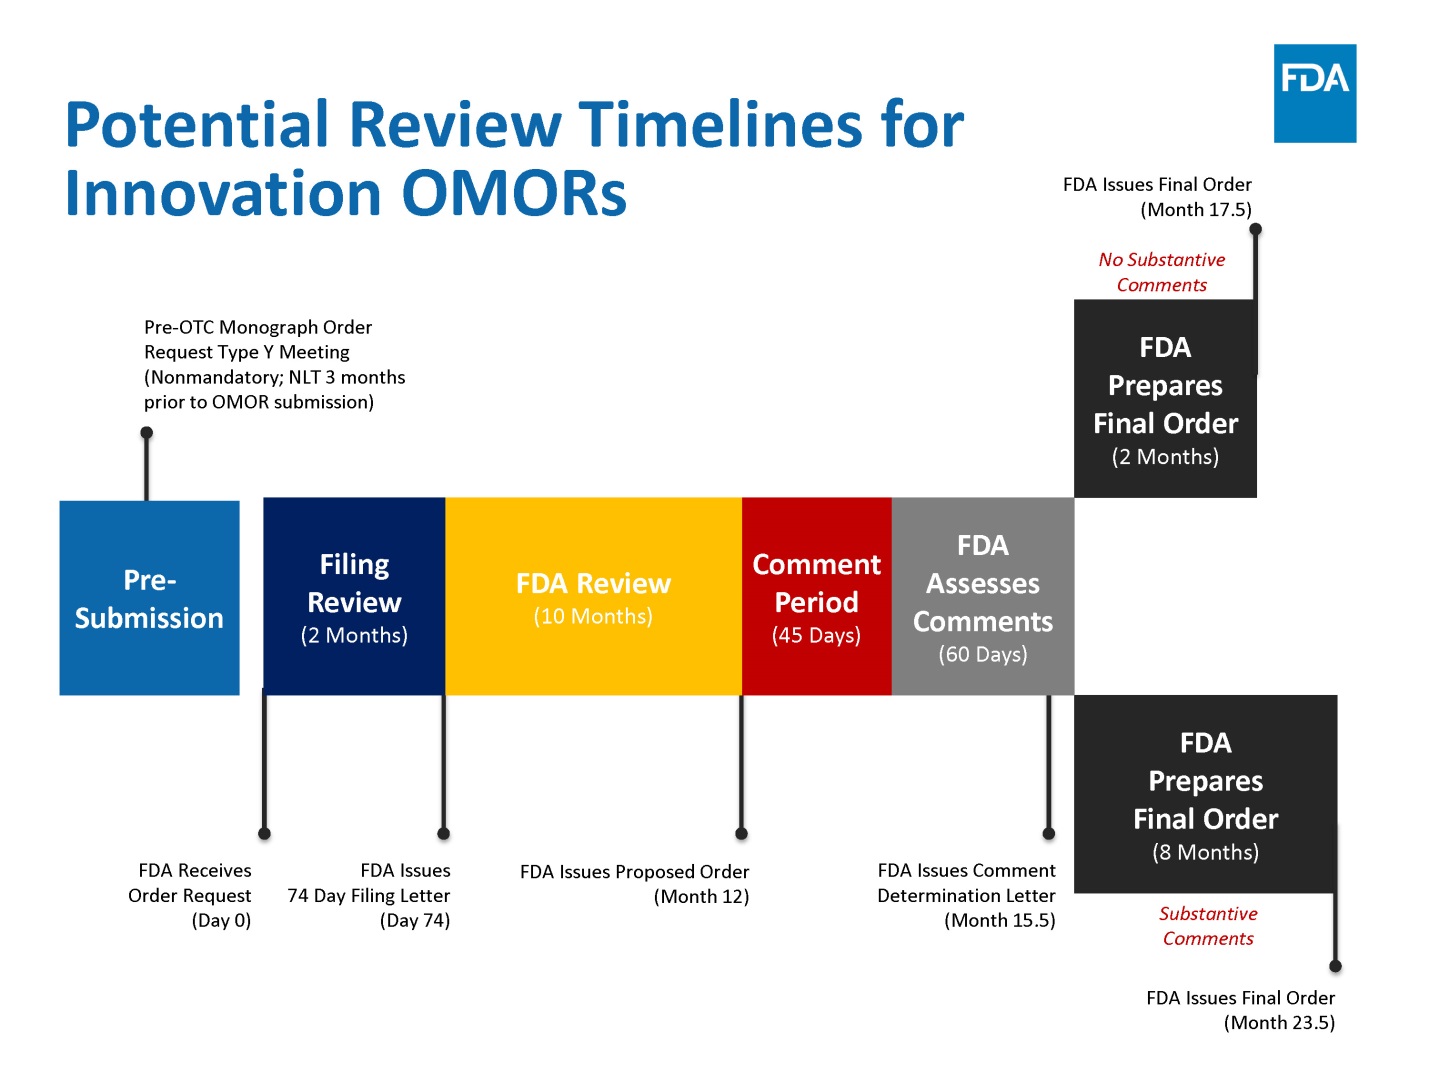 Potential review timelines for innovation OMORs